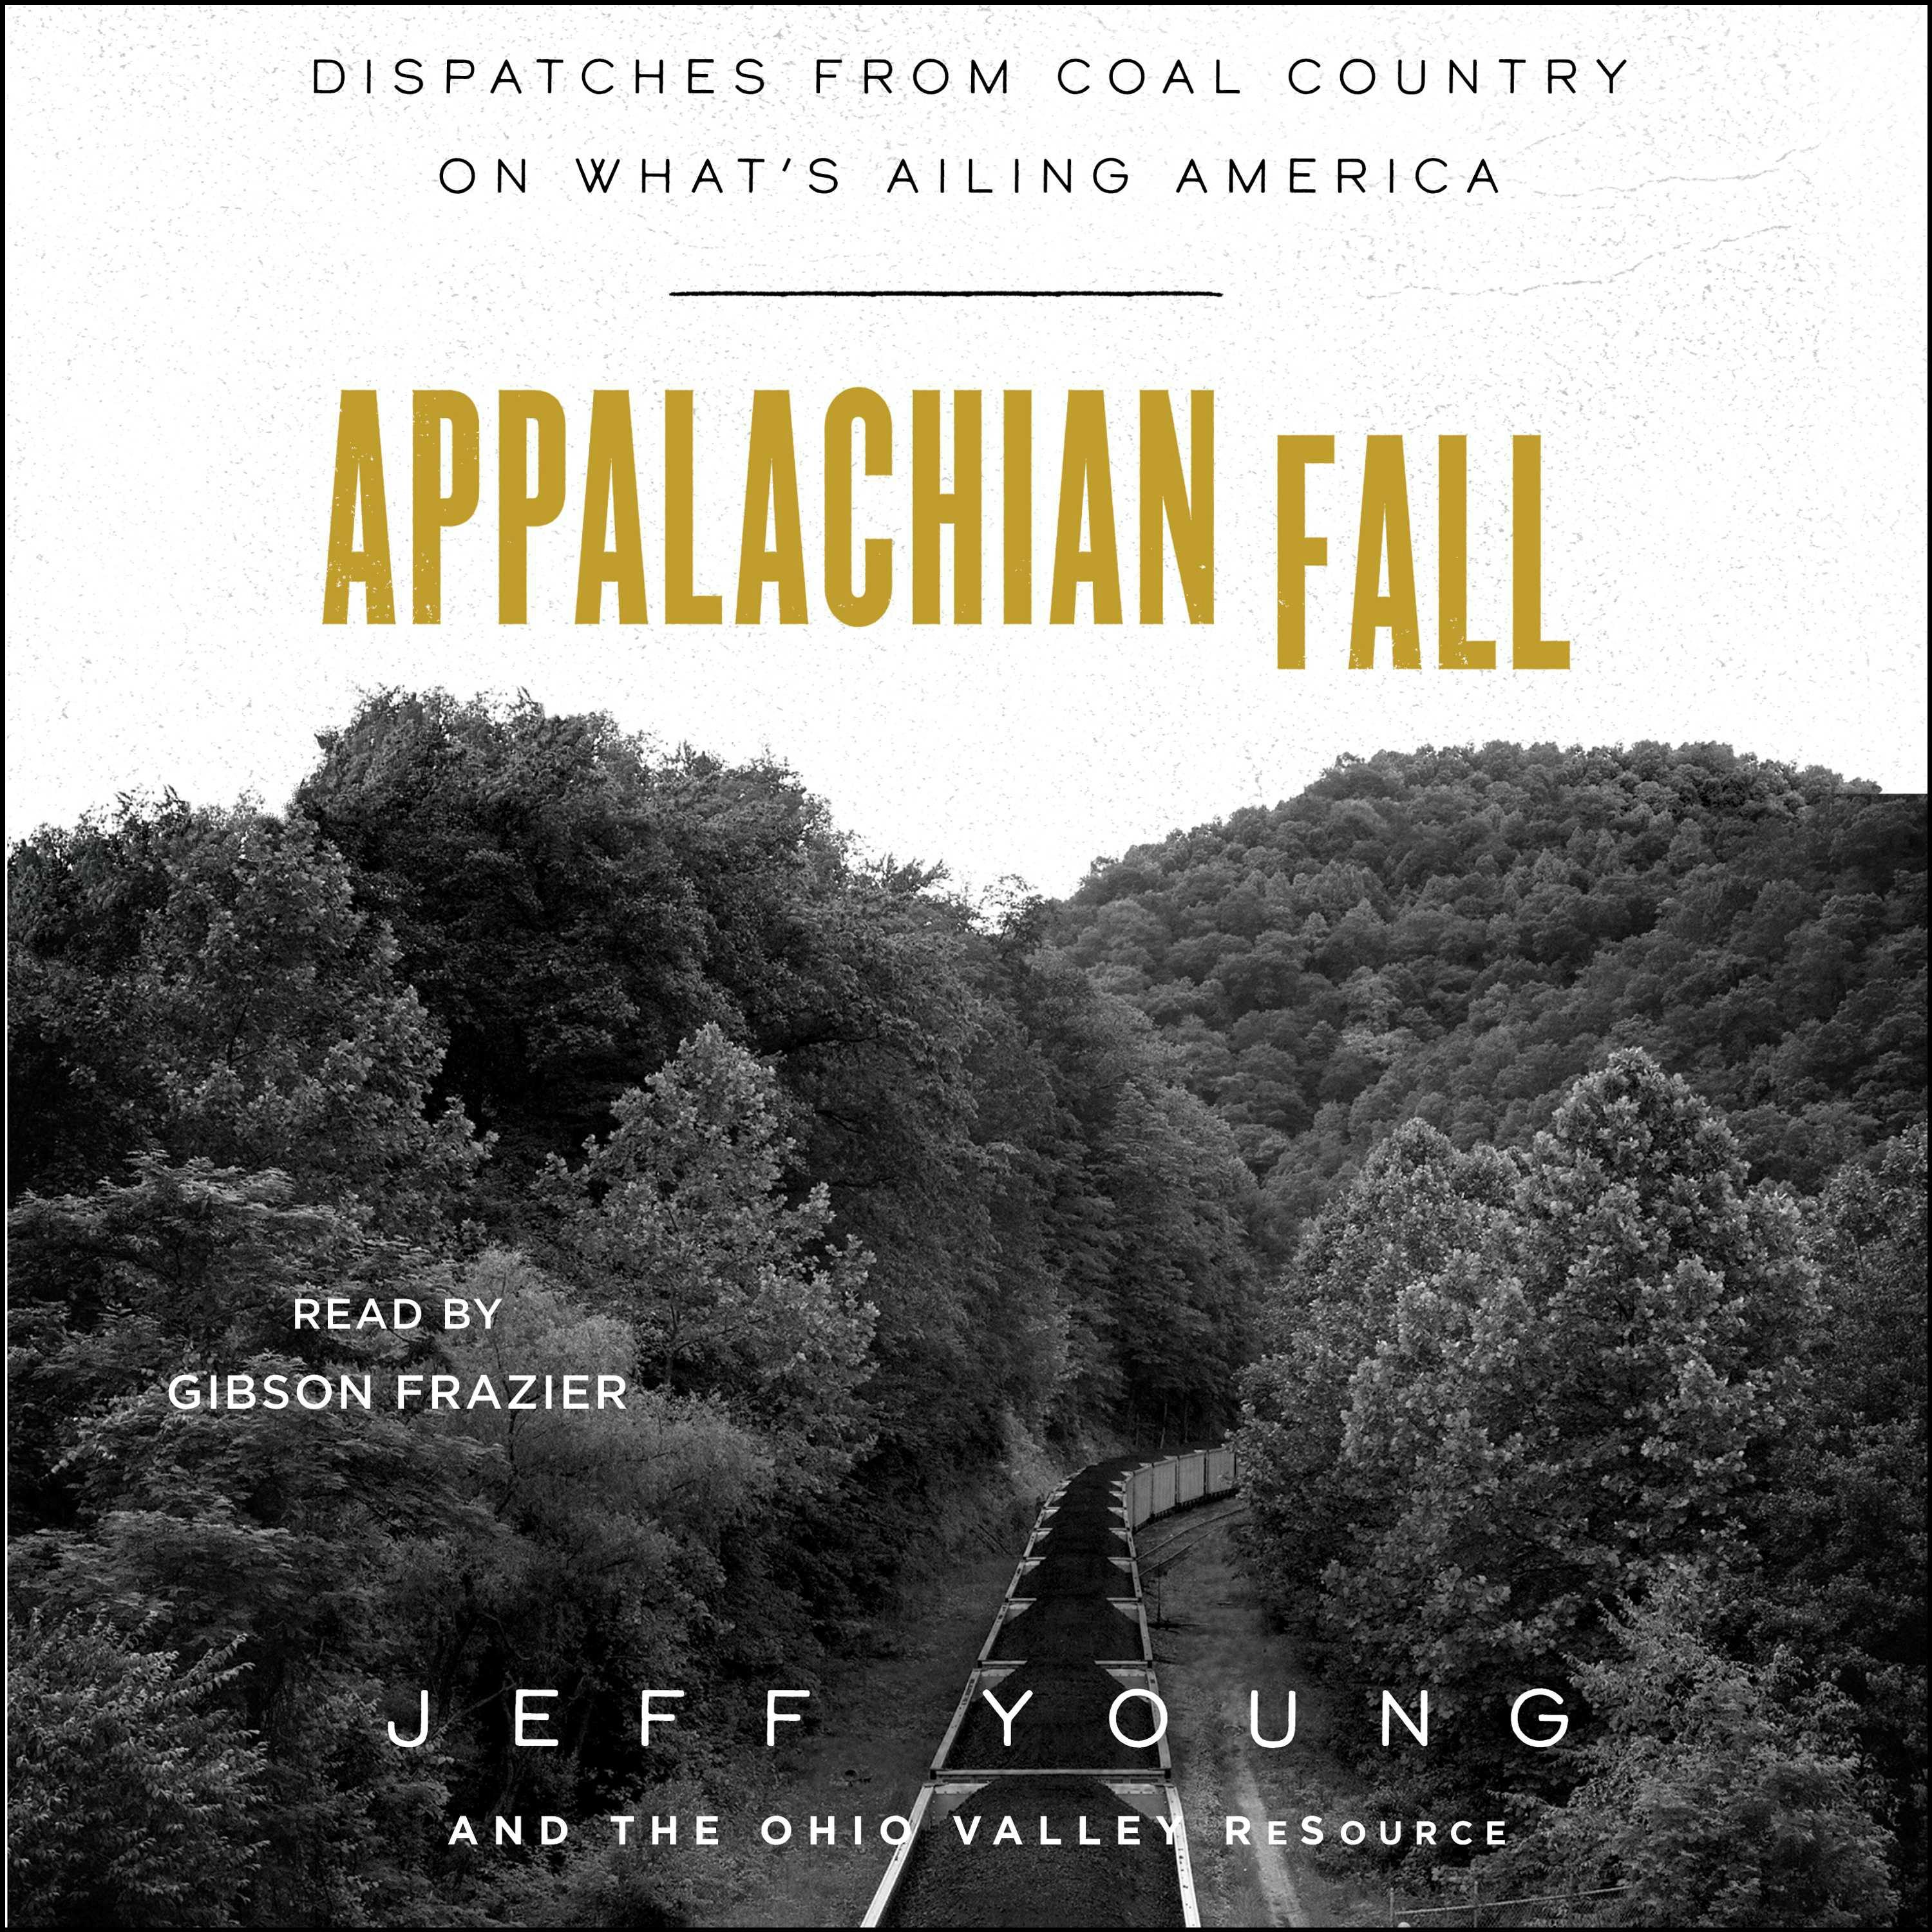 Appalachian Fall: Dispatches from Coal Country on What's Ailing America - Jeff Young